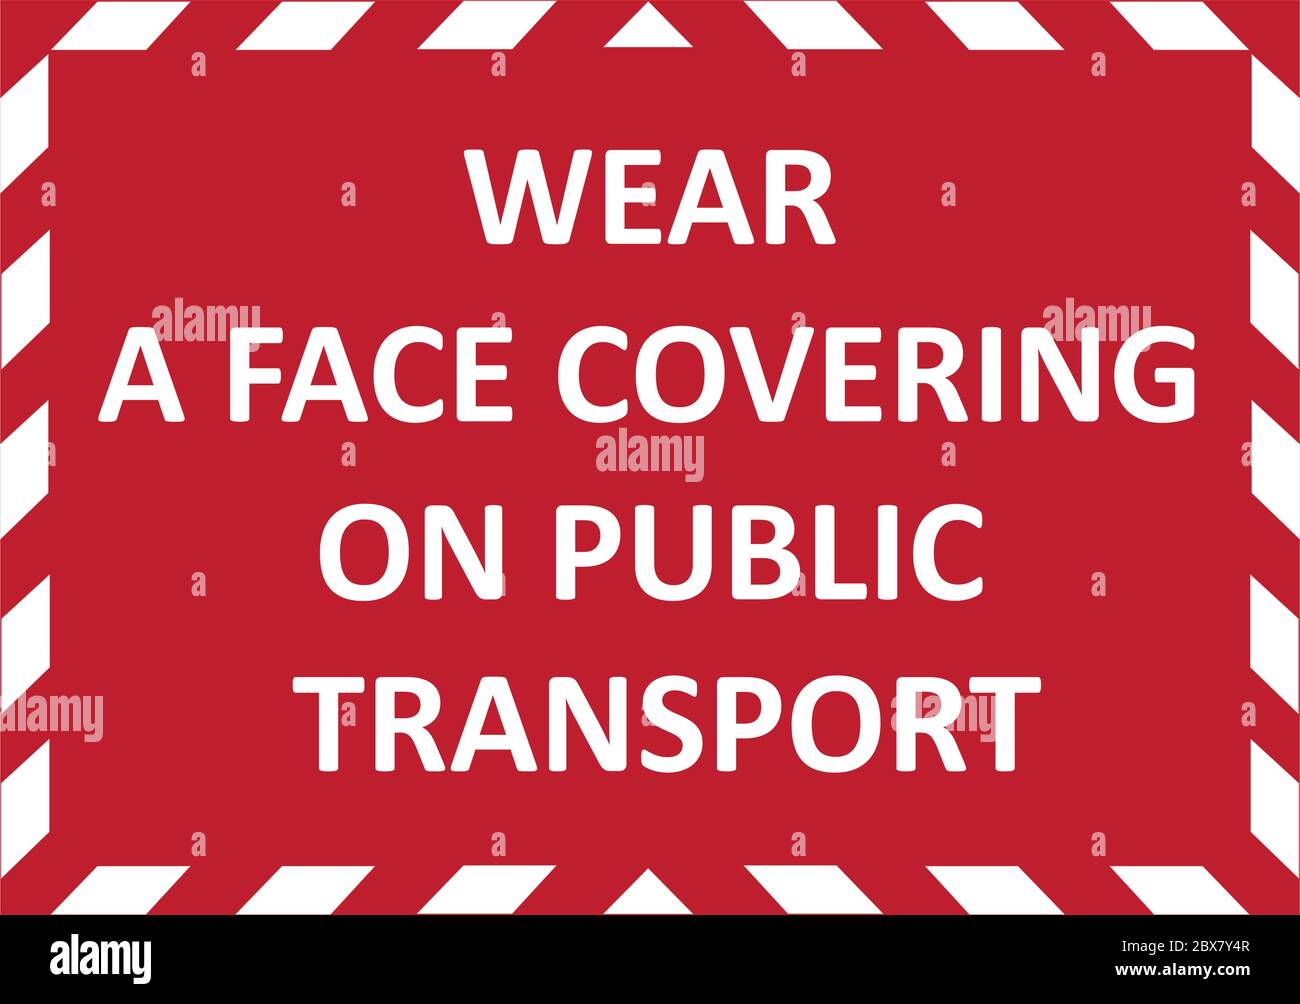 WEAR A FACE COVERING ON PUBLIC TRANSPORT warning sign. Red quarantine sign that help to battle against Covid-19 in the United Kingdom. Vector. Stock Vector